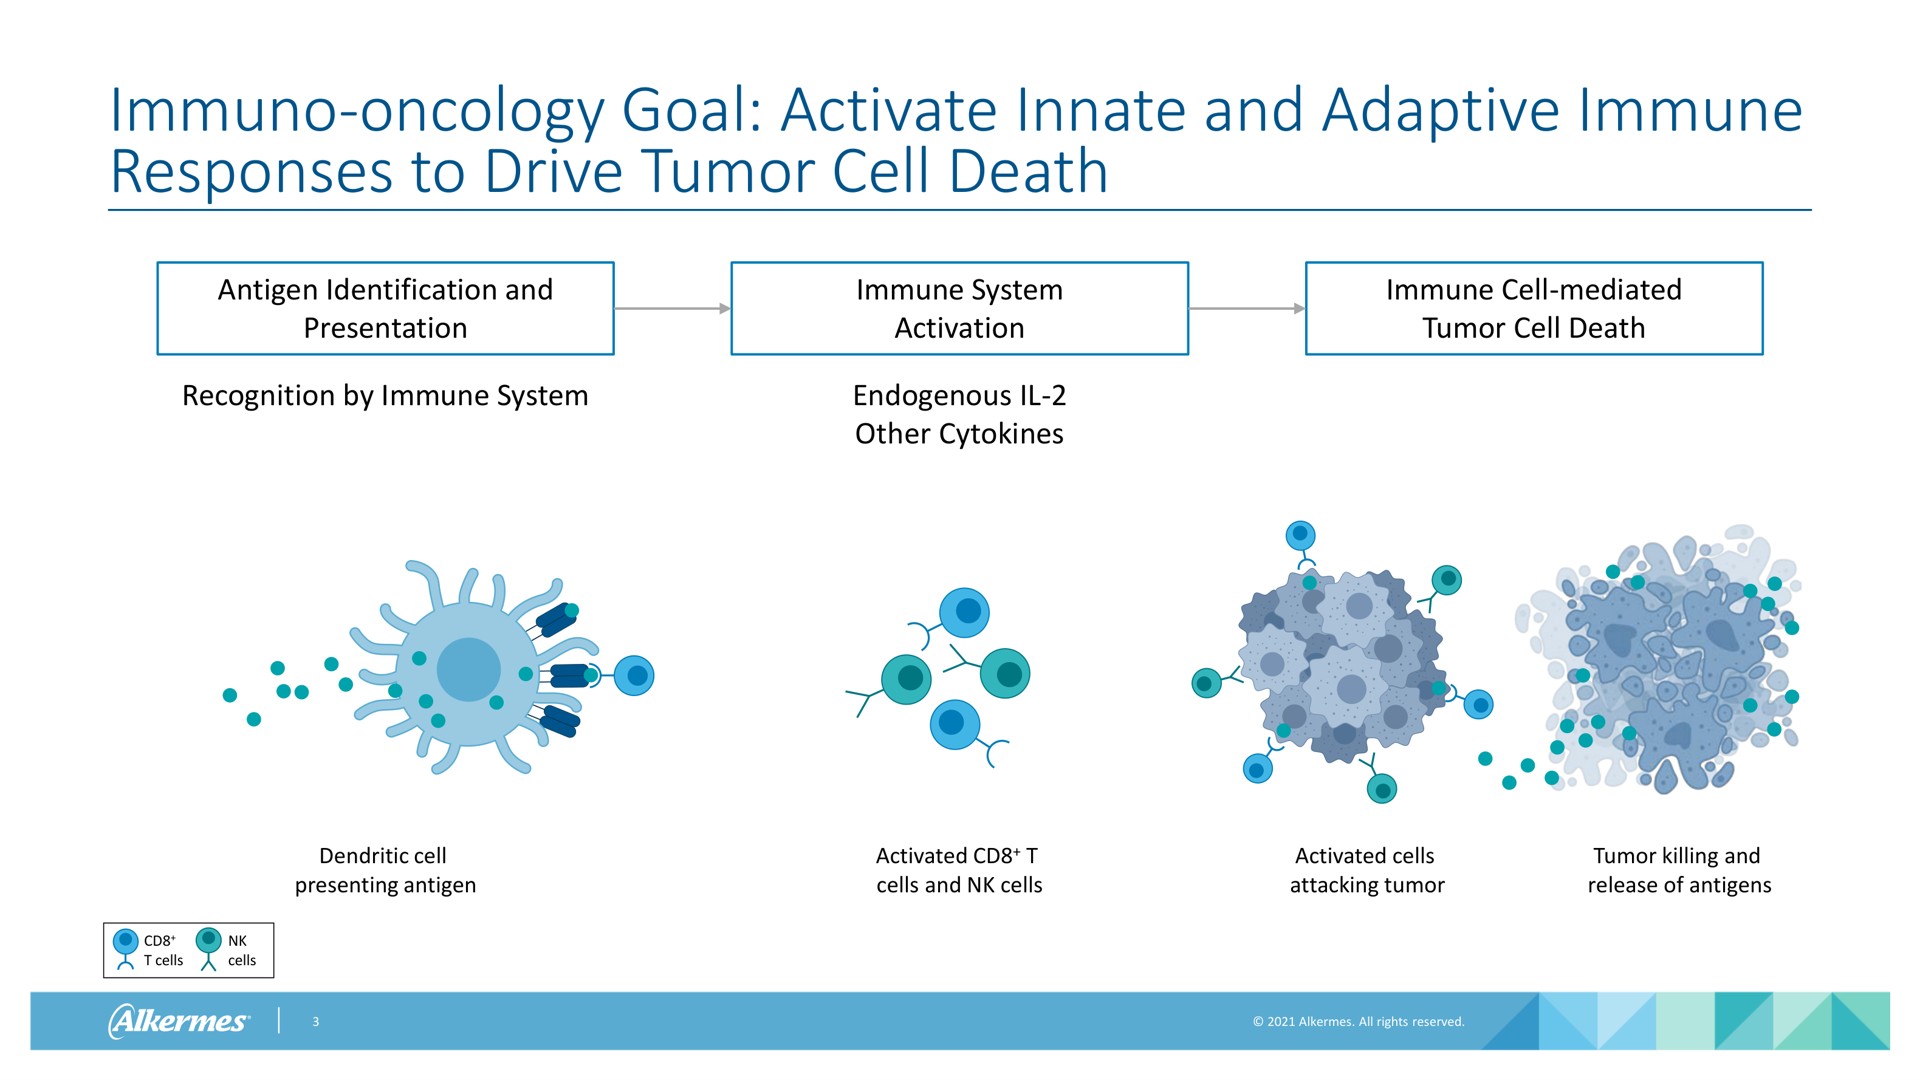 oncology goal activate innate and adaptive immune responses to drive tumor cell death antigen identification and presentation recognition by immune system immune system activation endogenous other immune cell mediated tumor cell death dendritic cell presenting antigen activated cells and cells activated cells attacking tumor tumor killing and release of antigens cells cells aes | Alkermes